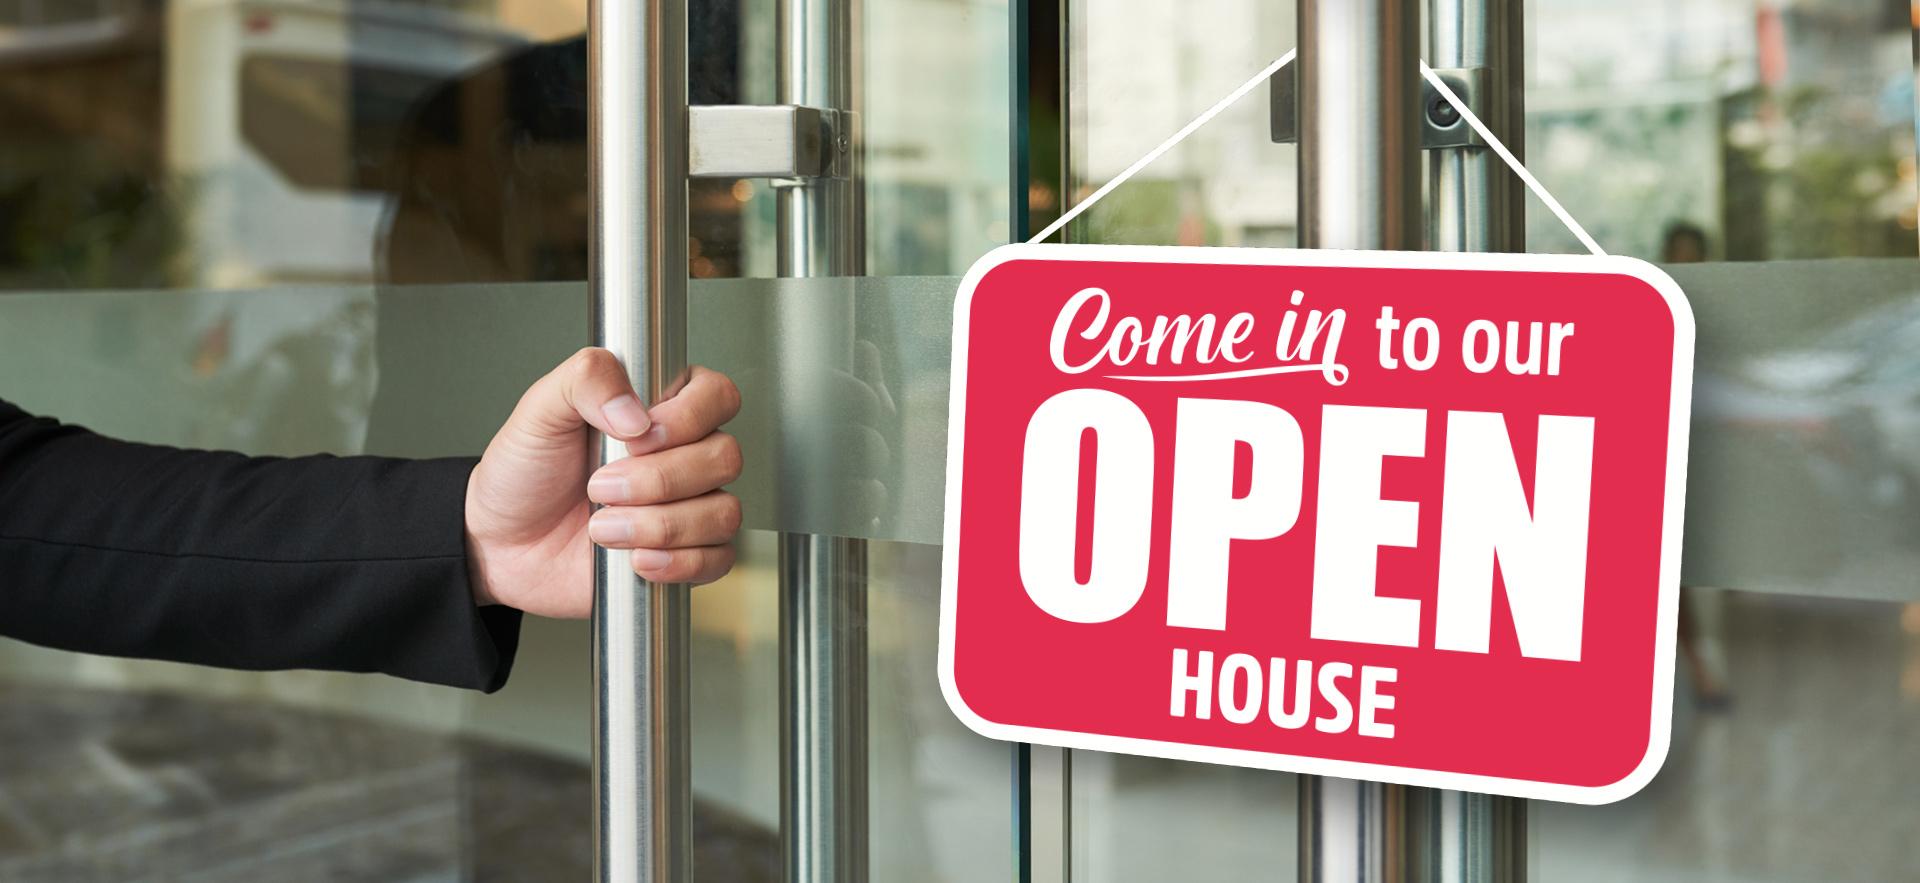 Glass doors with hand on one handle and sign hanging that says Come in to our OPEN HOUSE